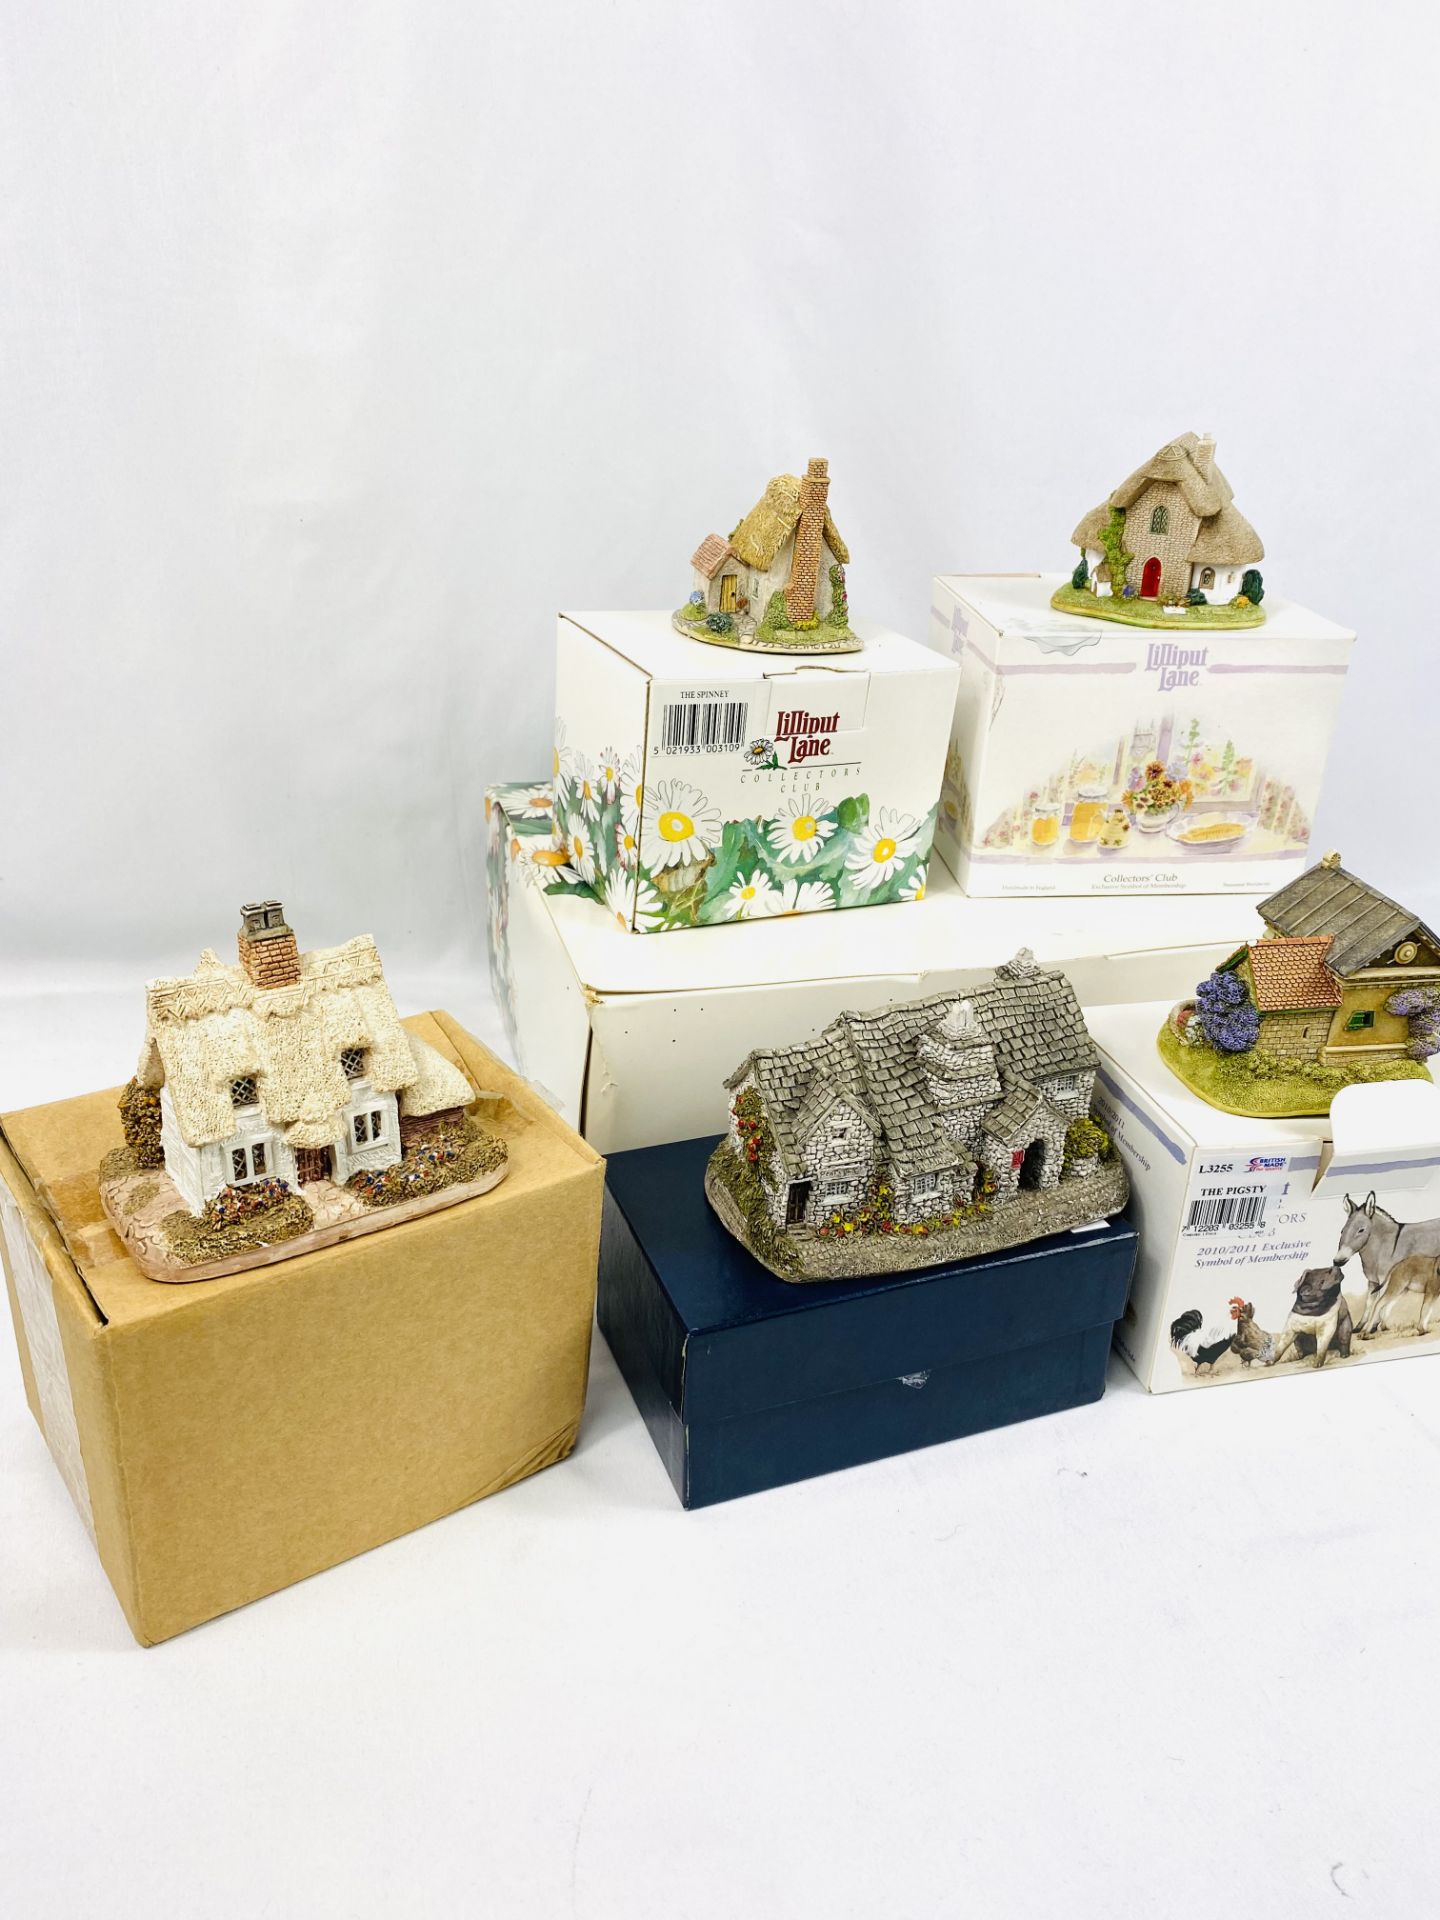 Six Lilliput Lane Cottages in boxes - Image 4 of 4